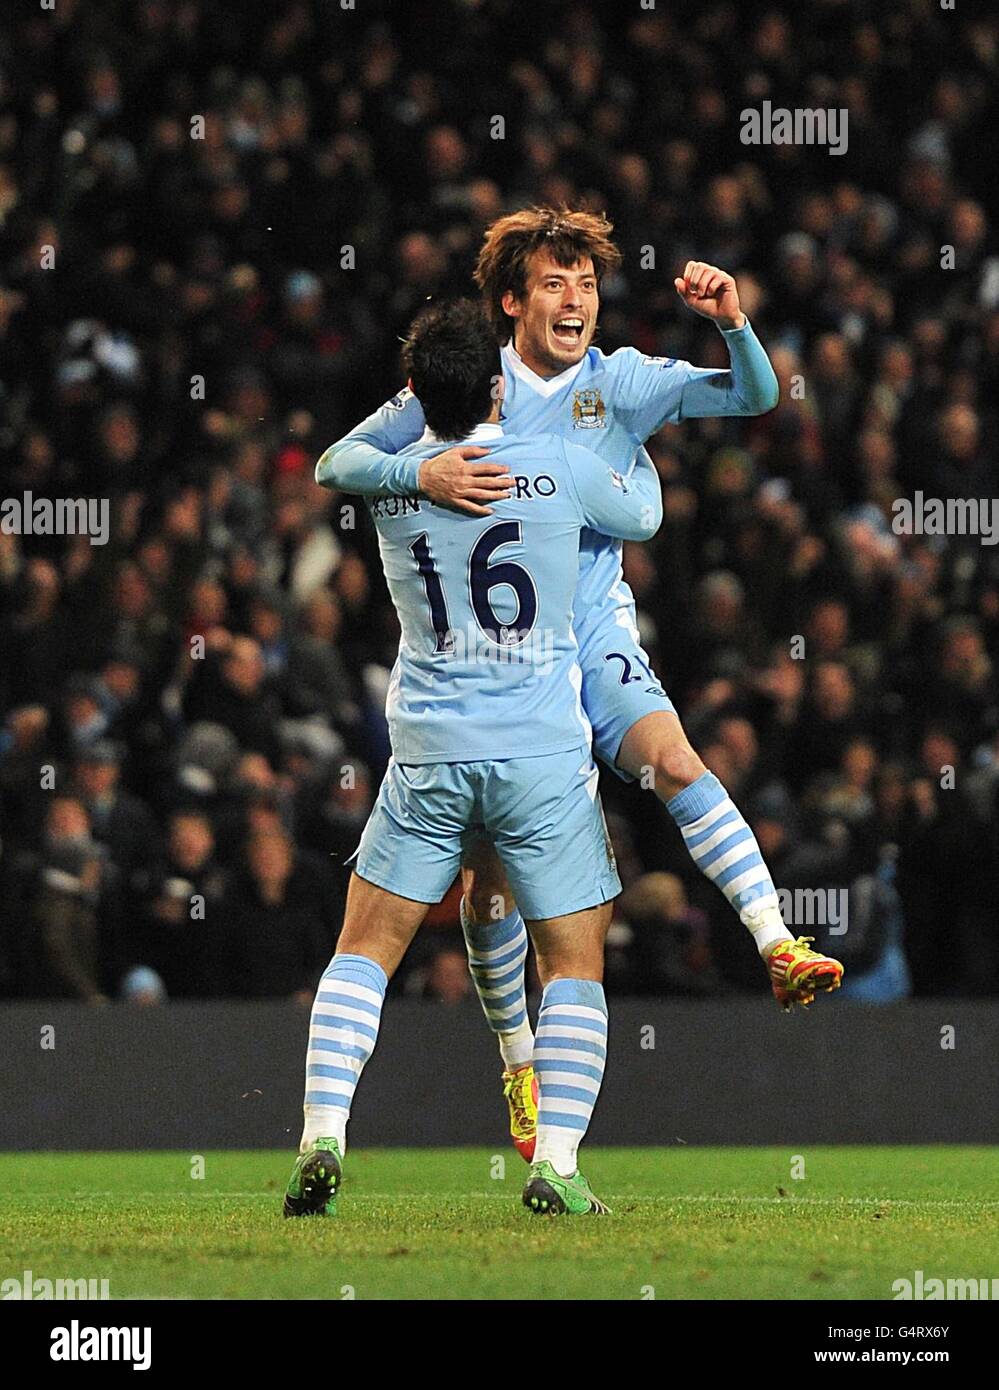 Manchester City's David Silva (right) celebrates after scoring the first goal with team mate Sergio Aguero (left) Stock Photo